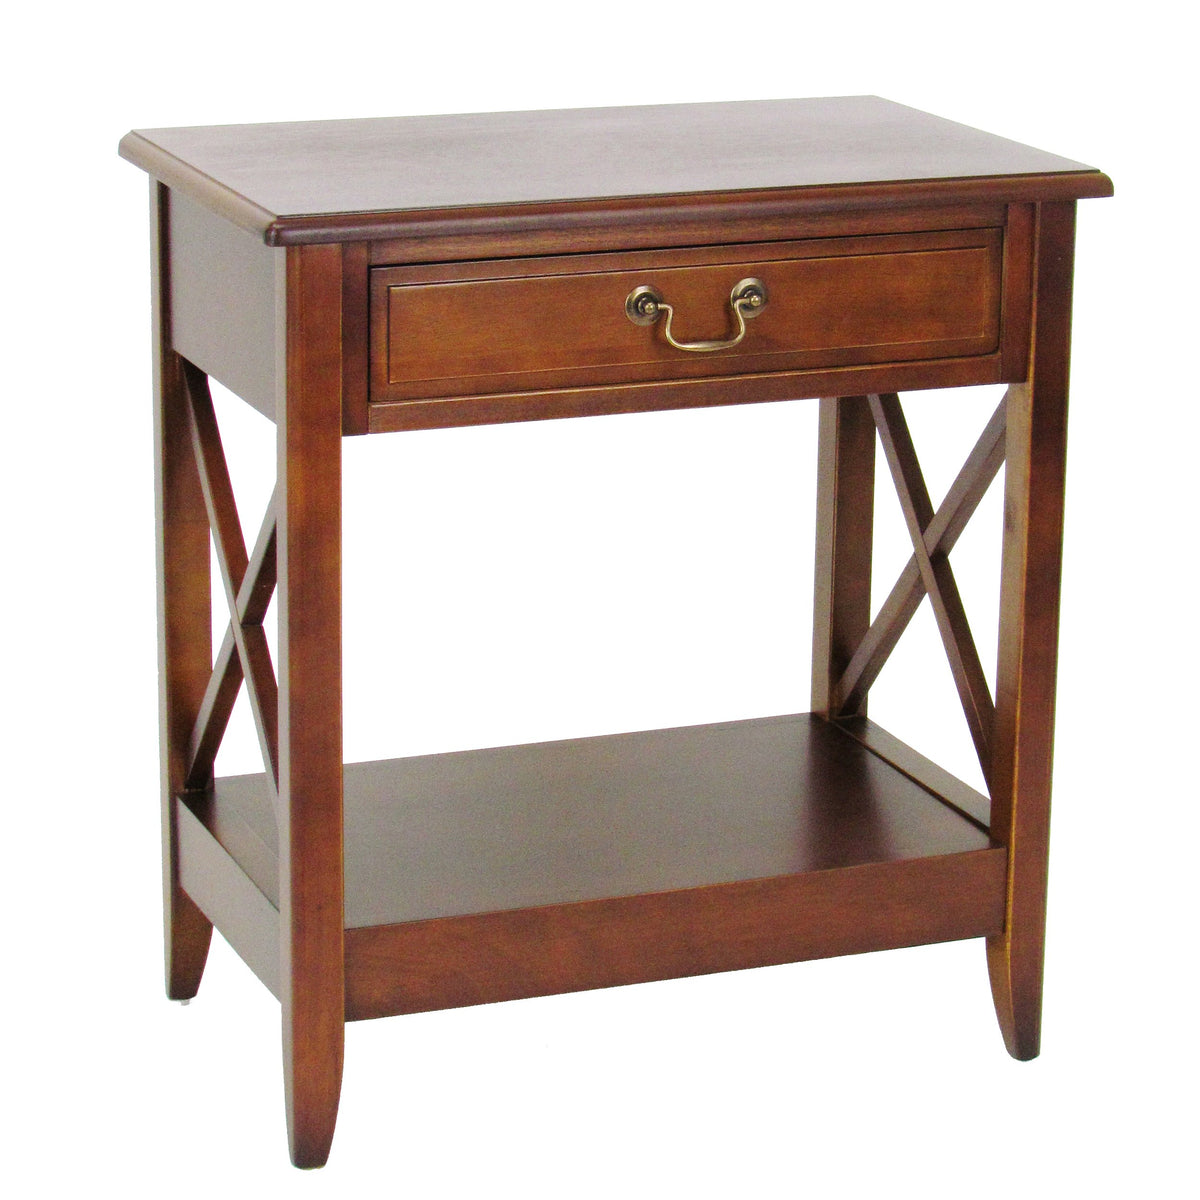 Transitional Style Nightstand with 1 Drawer and X Shape Sides, Brown - BM210451